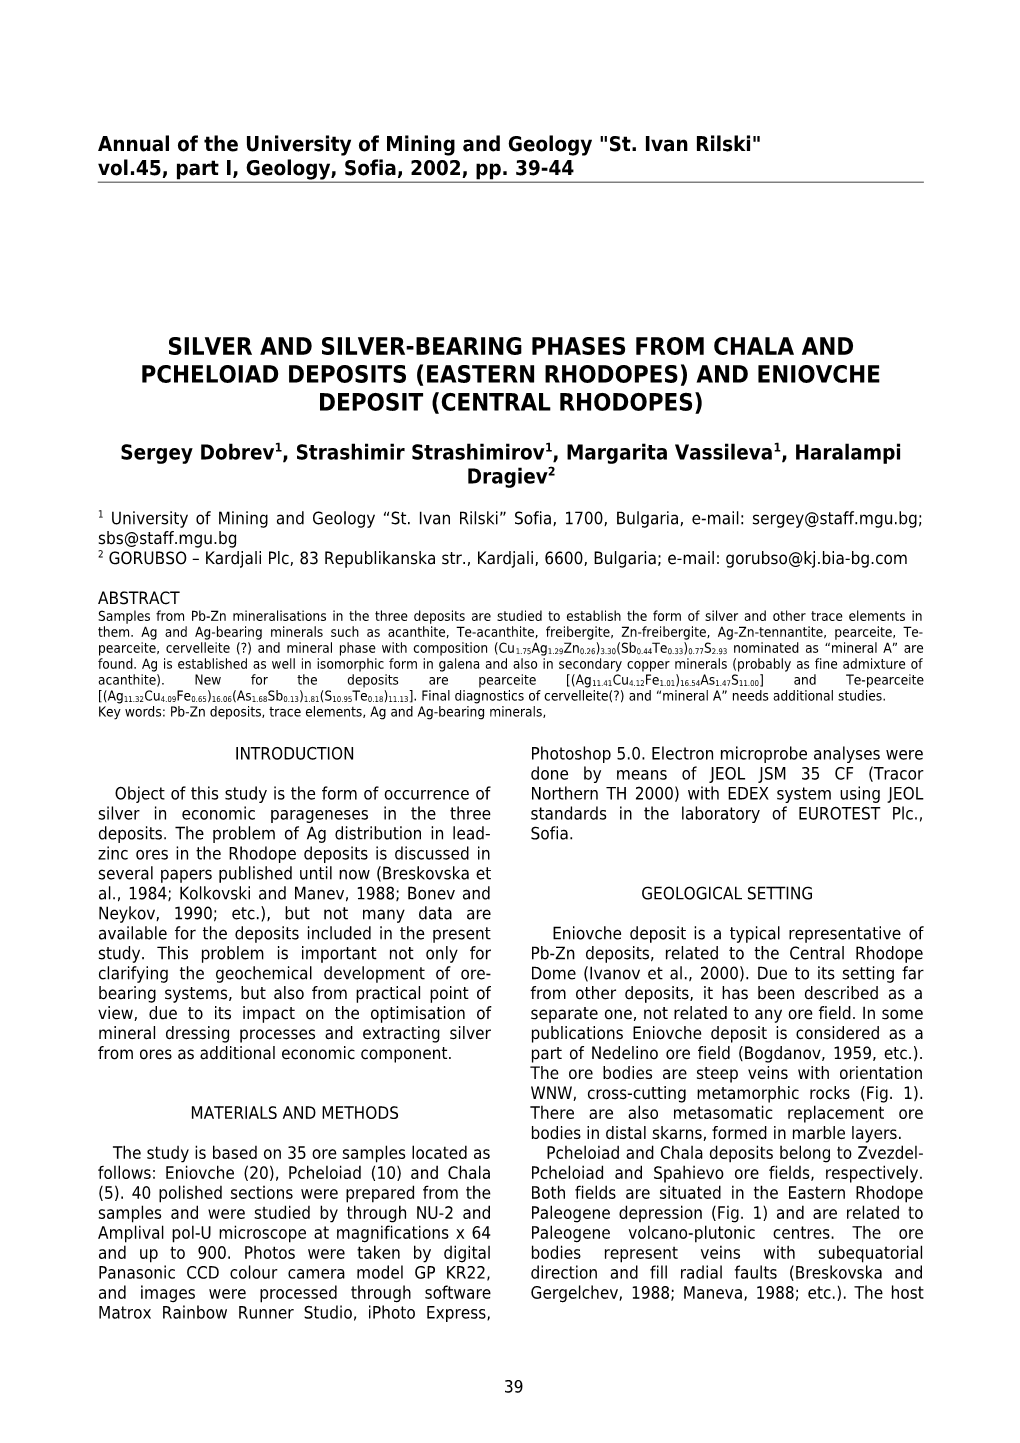 Silver and Silver-Bearing Phases from Chala and Pcheloiad Deposits (Eastern Rhodopes) And